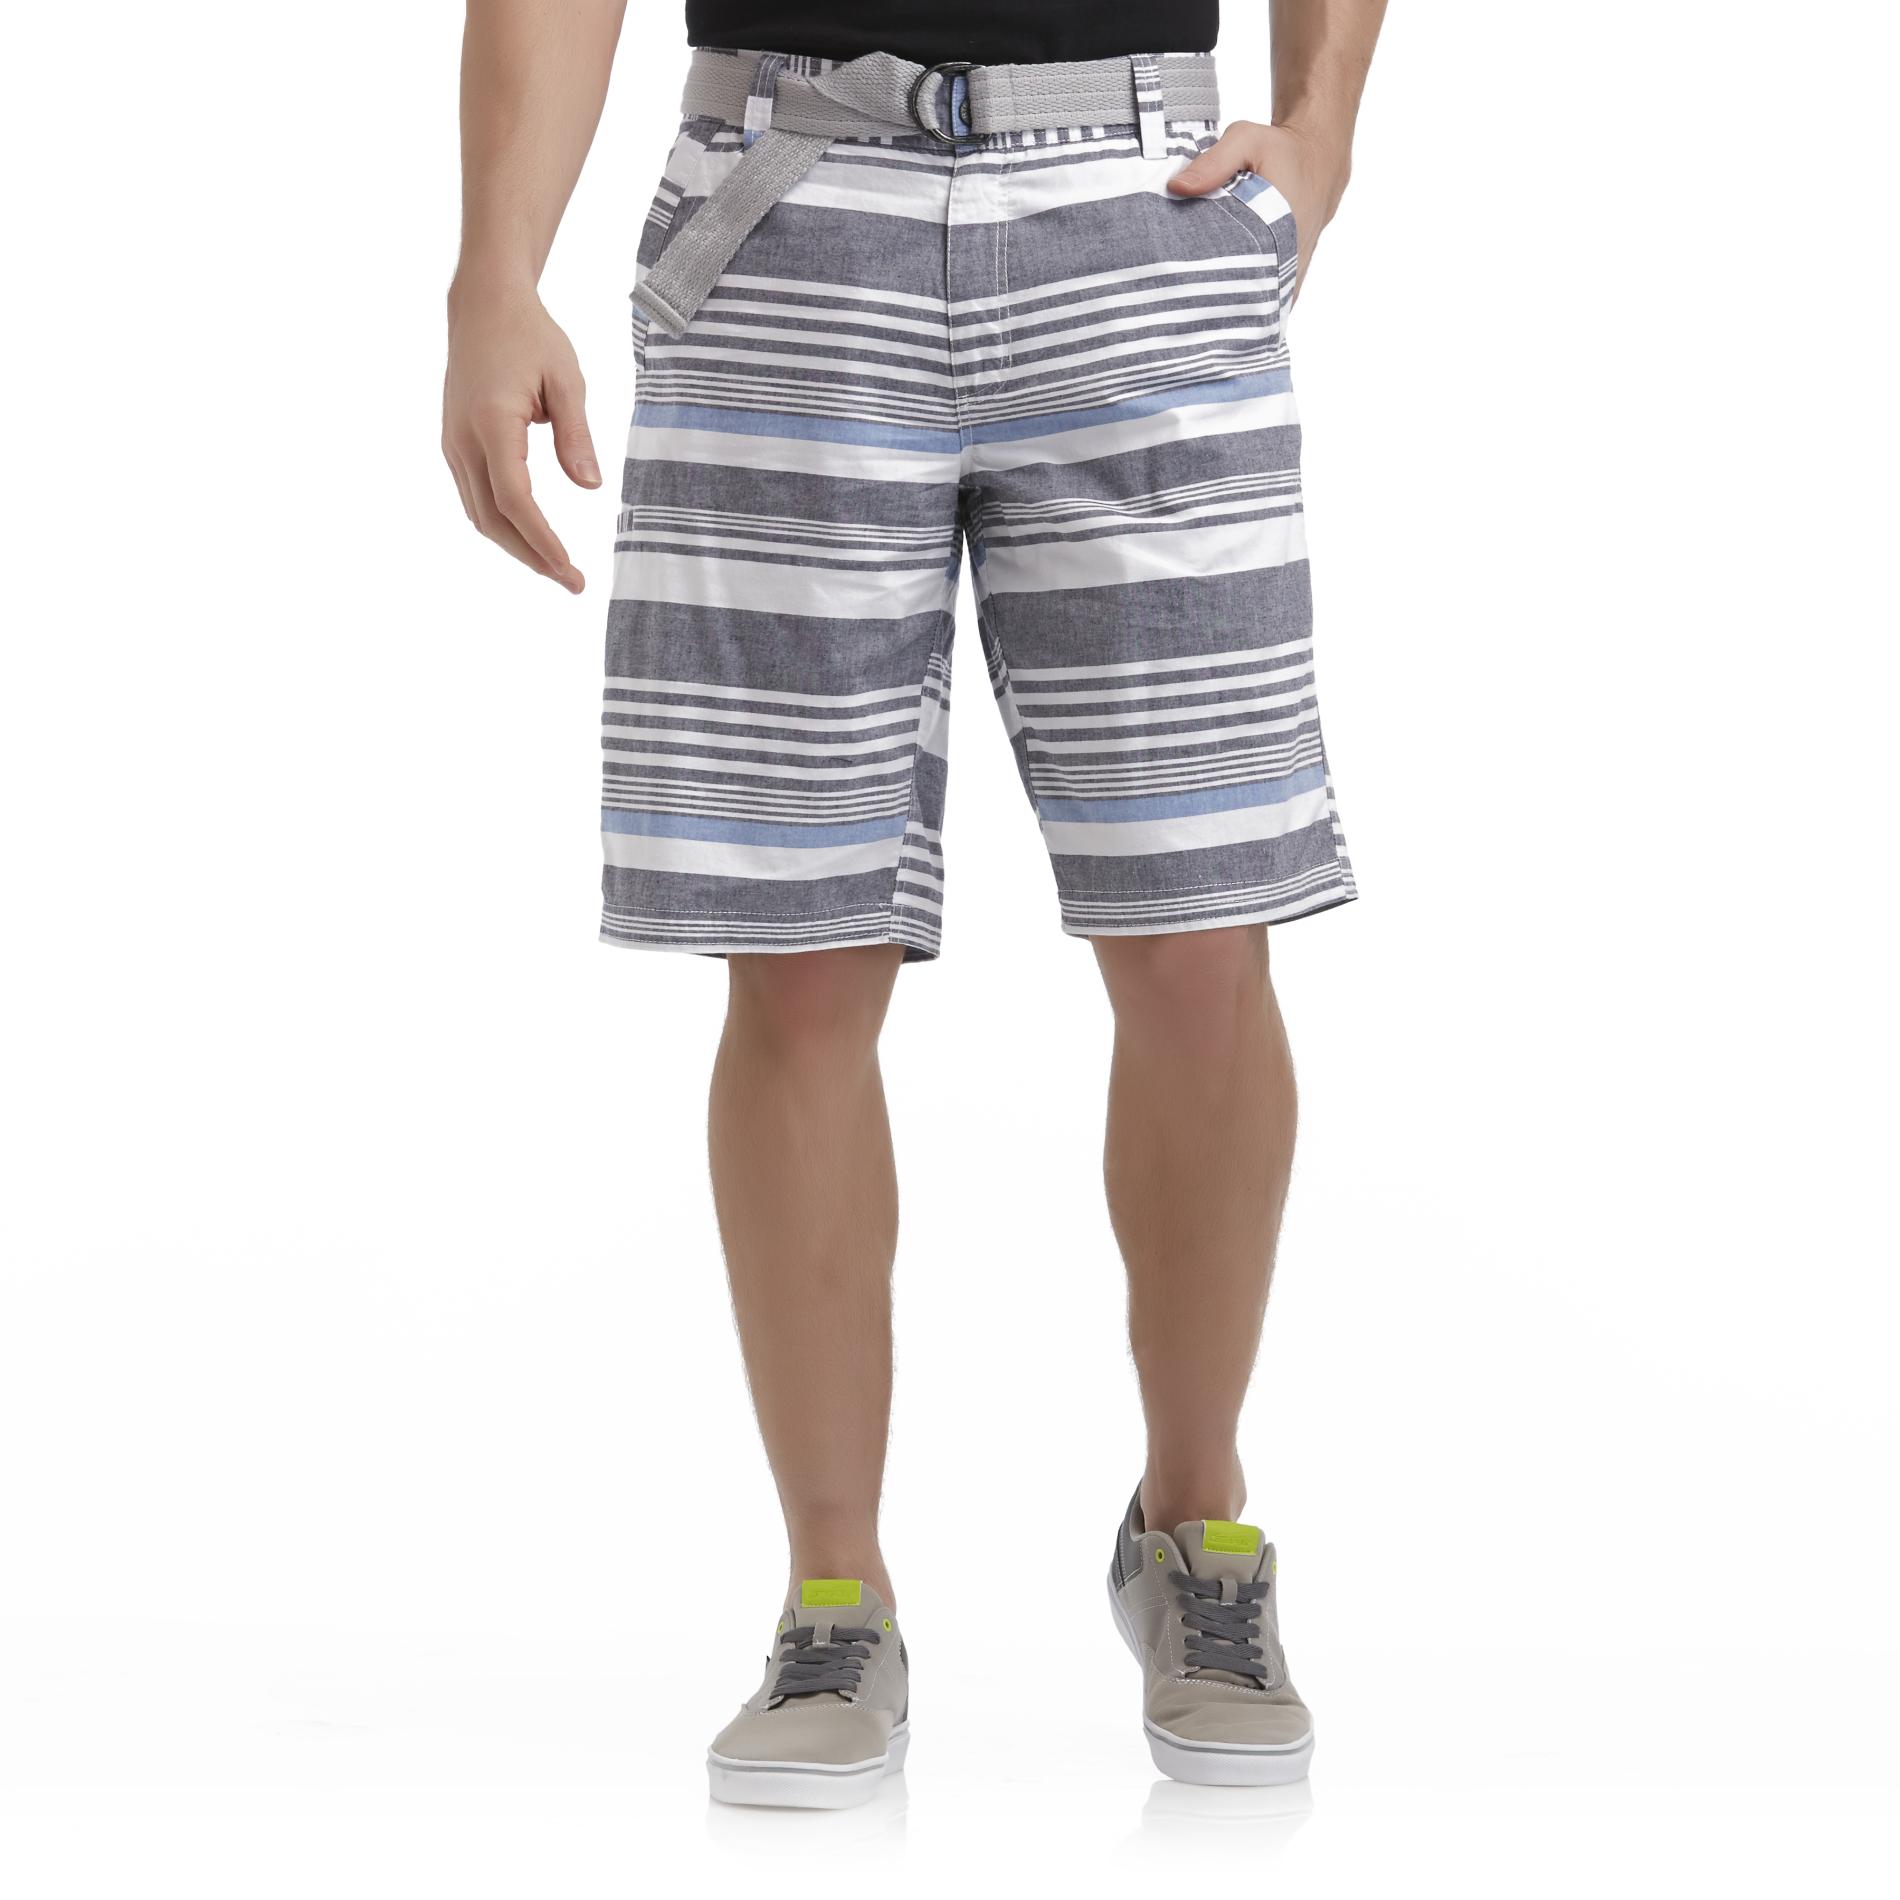 Route 66 Men's Belted Shorts - Striped